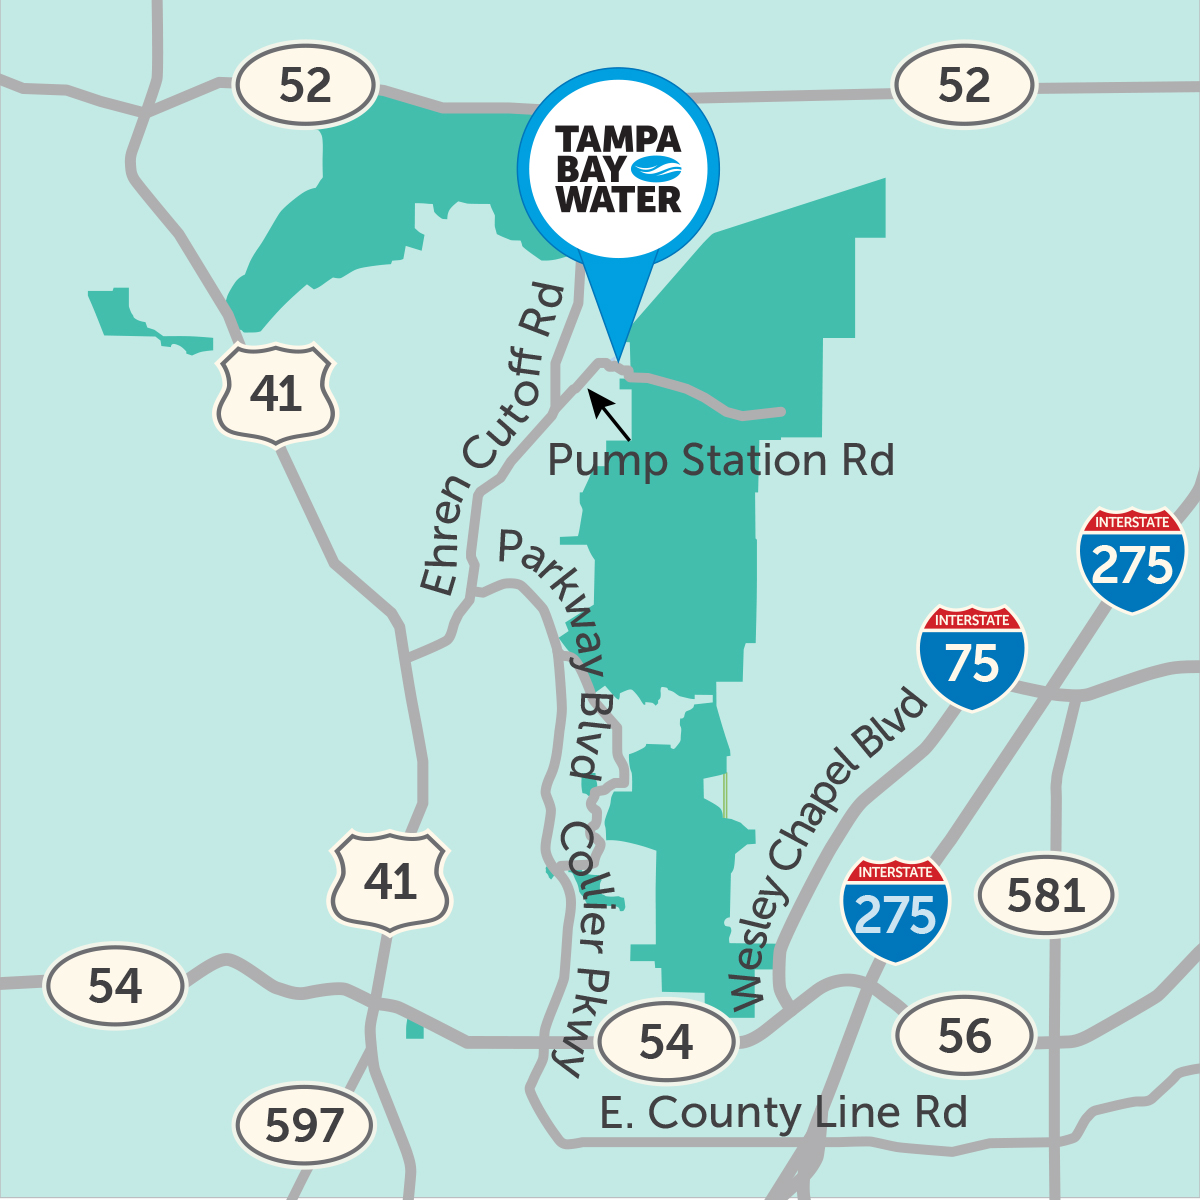 Tampa Bay Water's Infrastructure and Emergency Management Building is located at 8865 Pump Station Road
Land O'Lakes, FL 34639